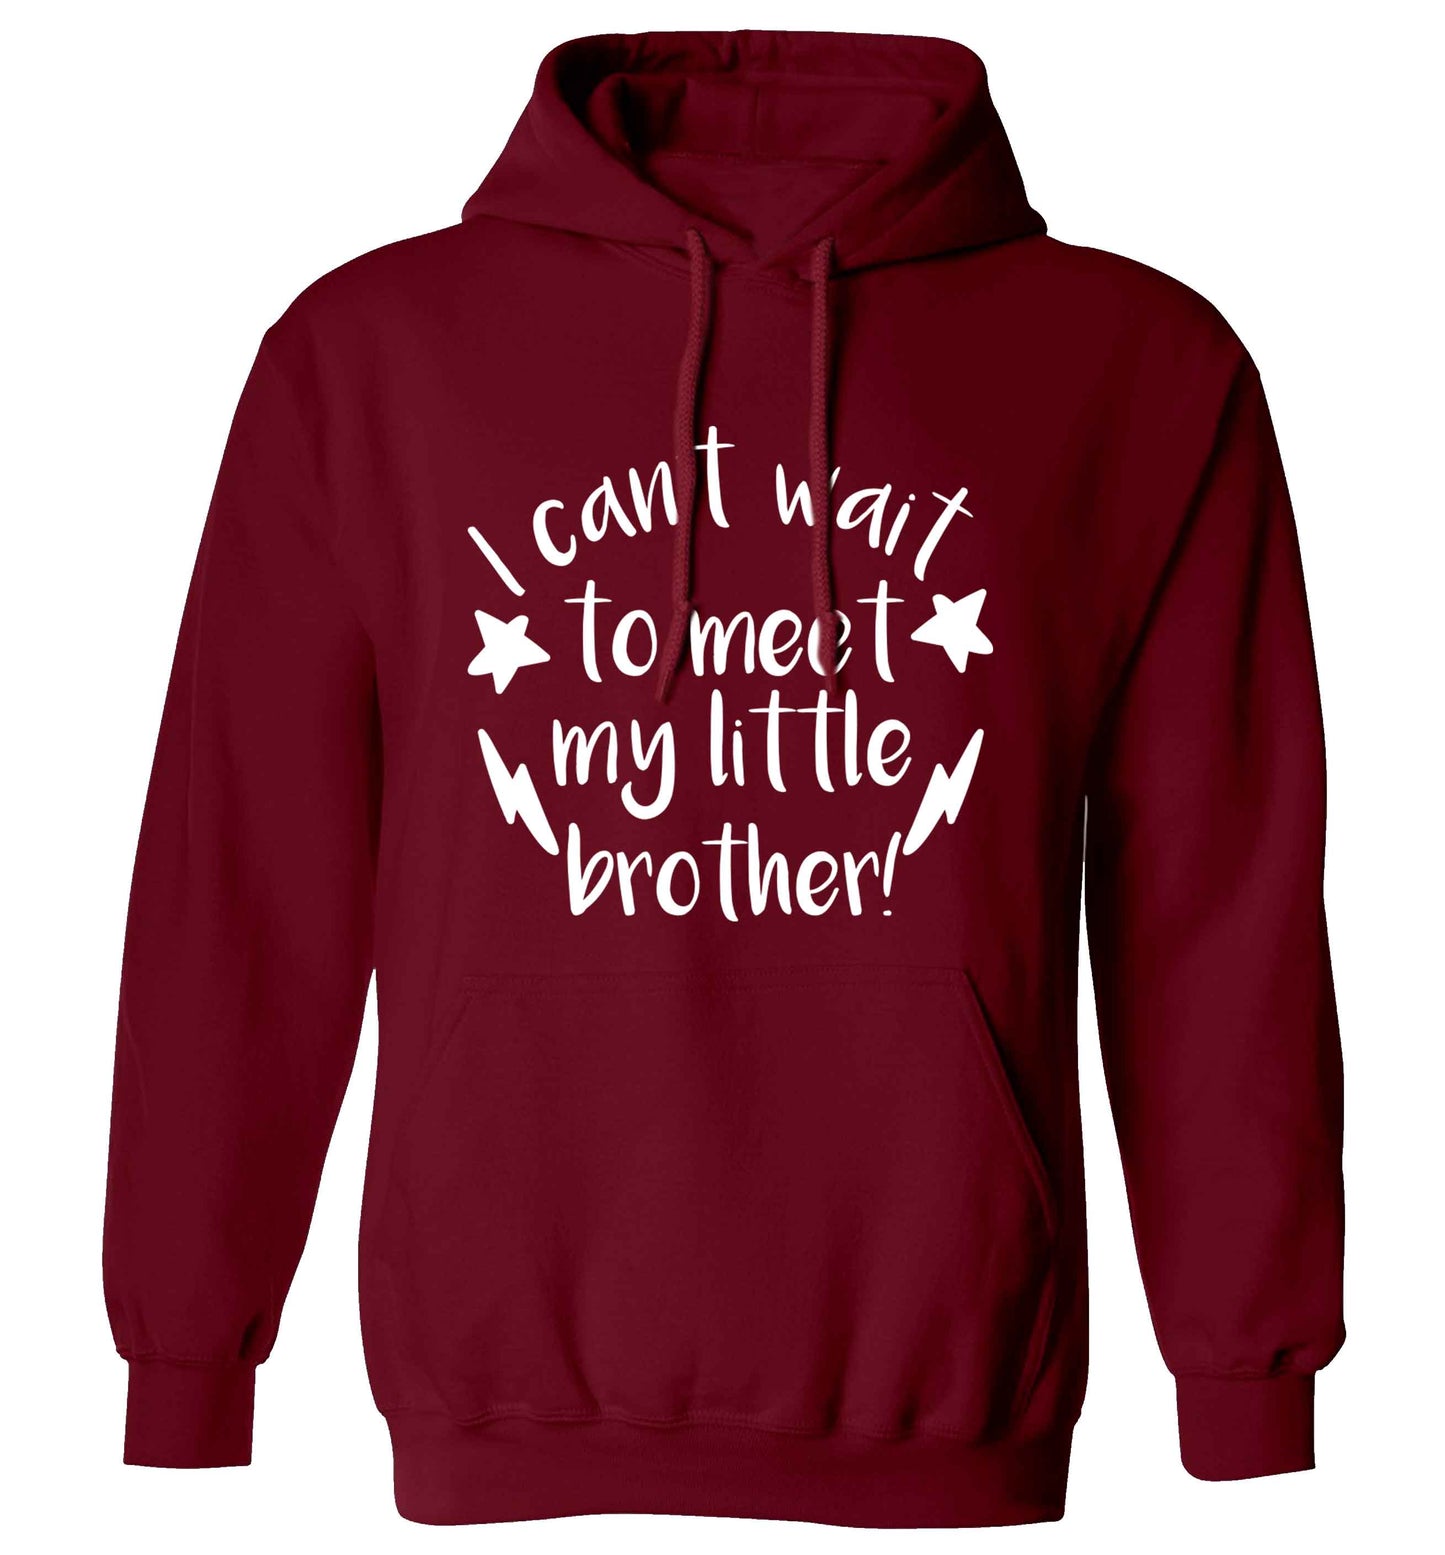 I can't wait to meet my sister! adults unisex maroon hoodie 2XL